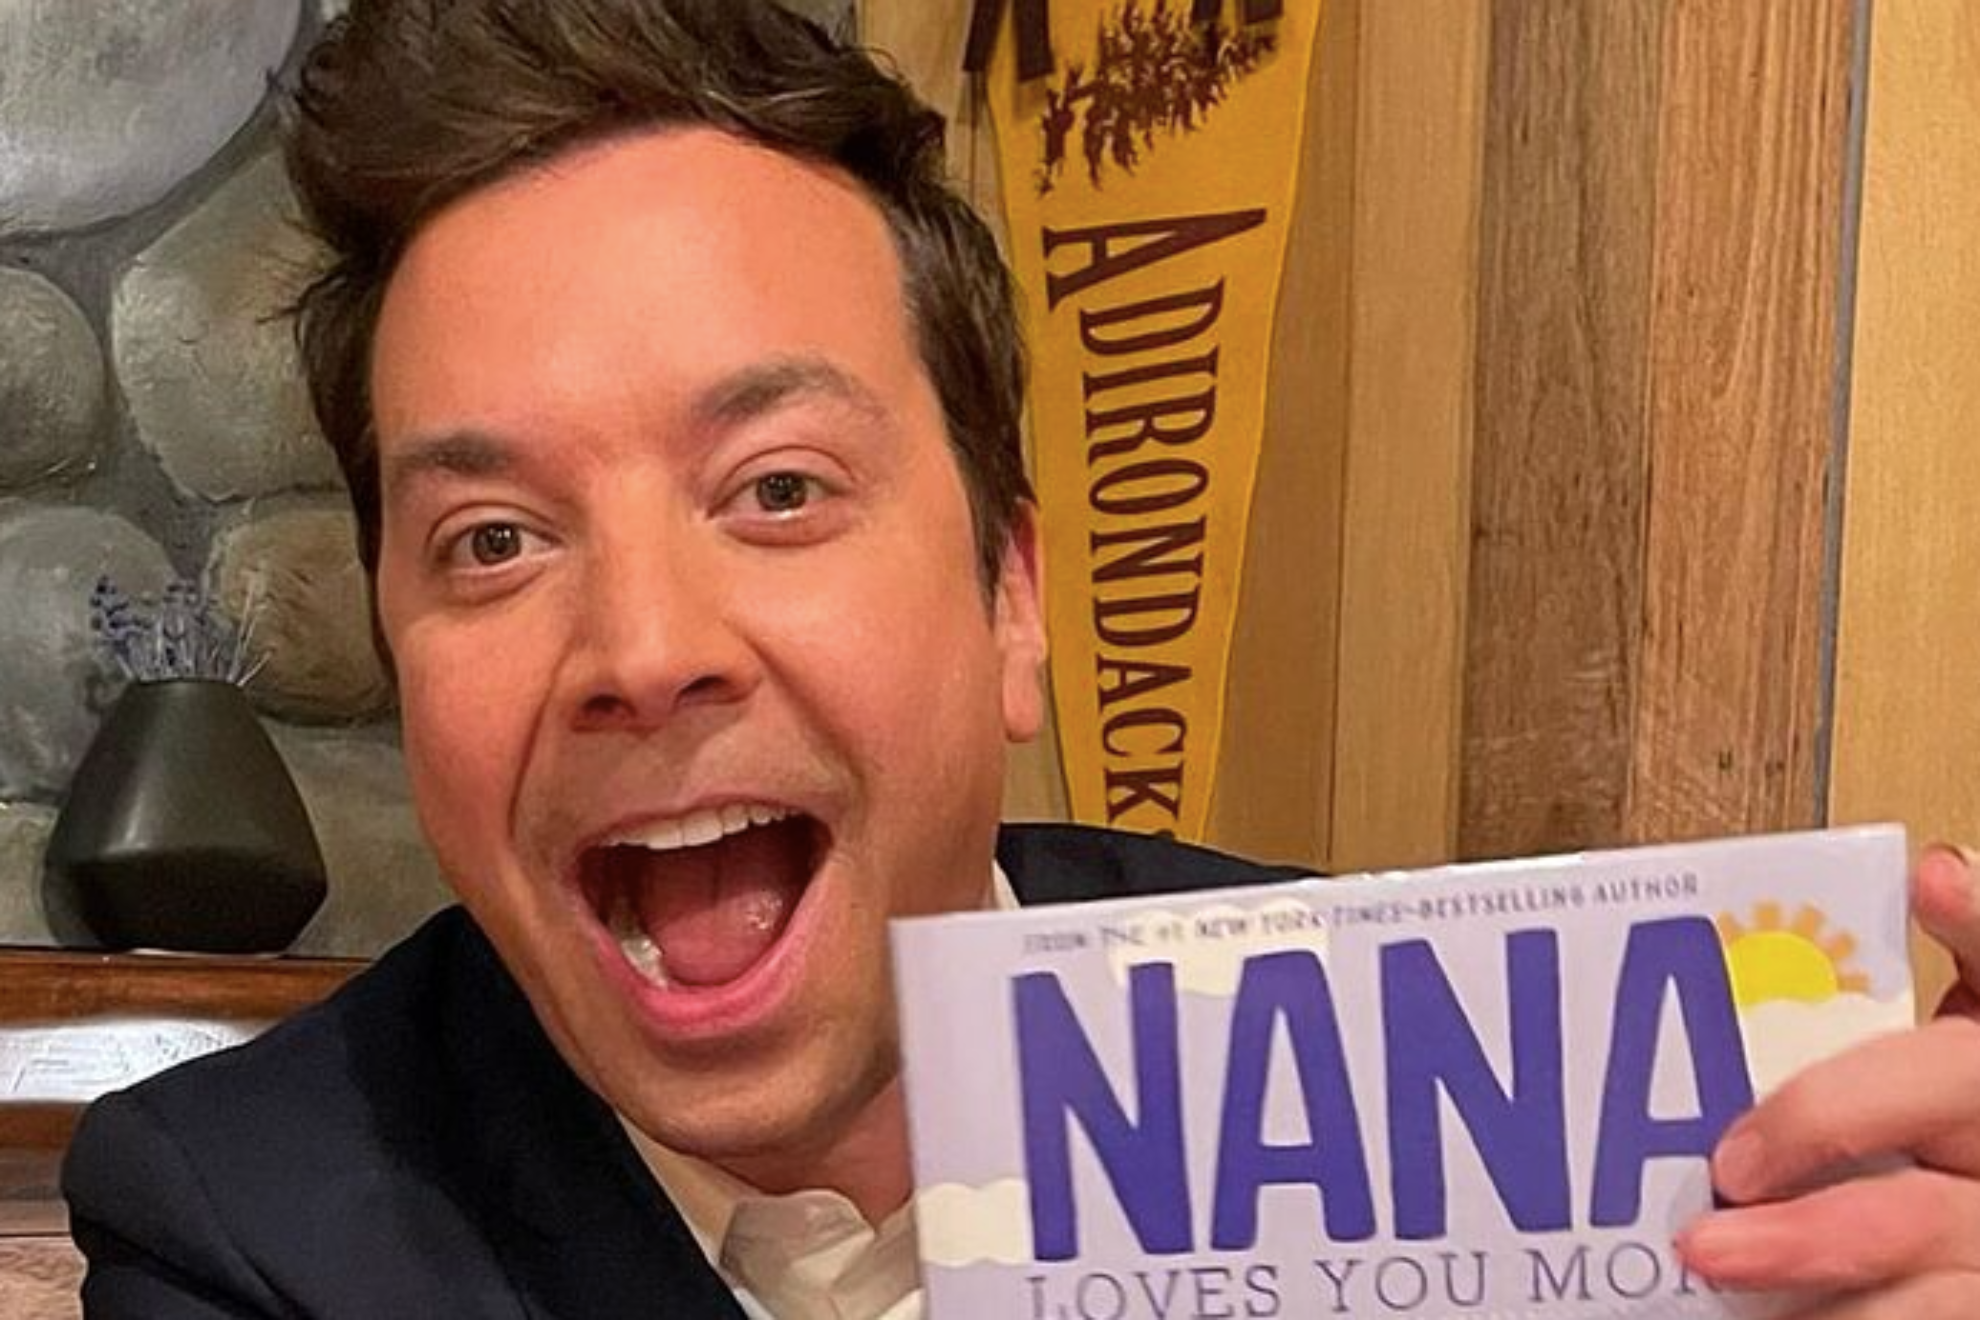 Jimmy Fallon takes fans by surprise at Jonas Brothers concert